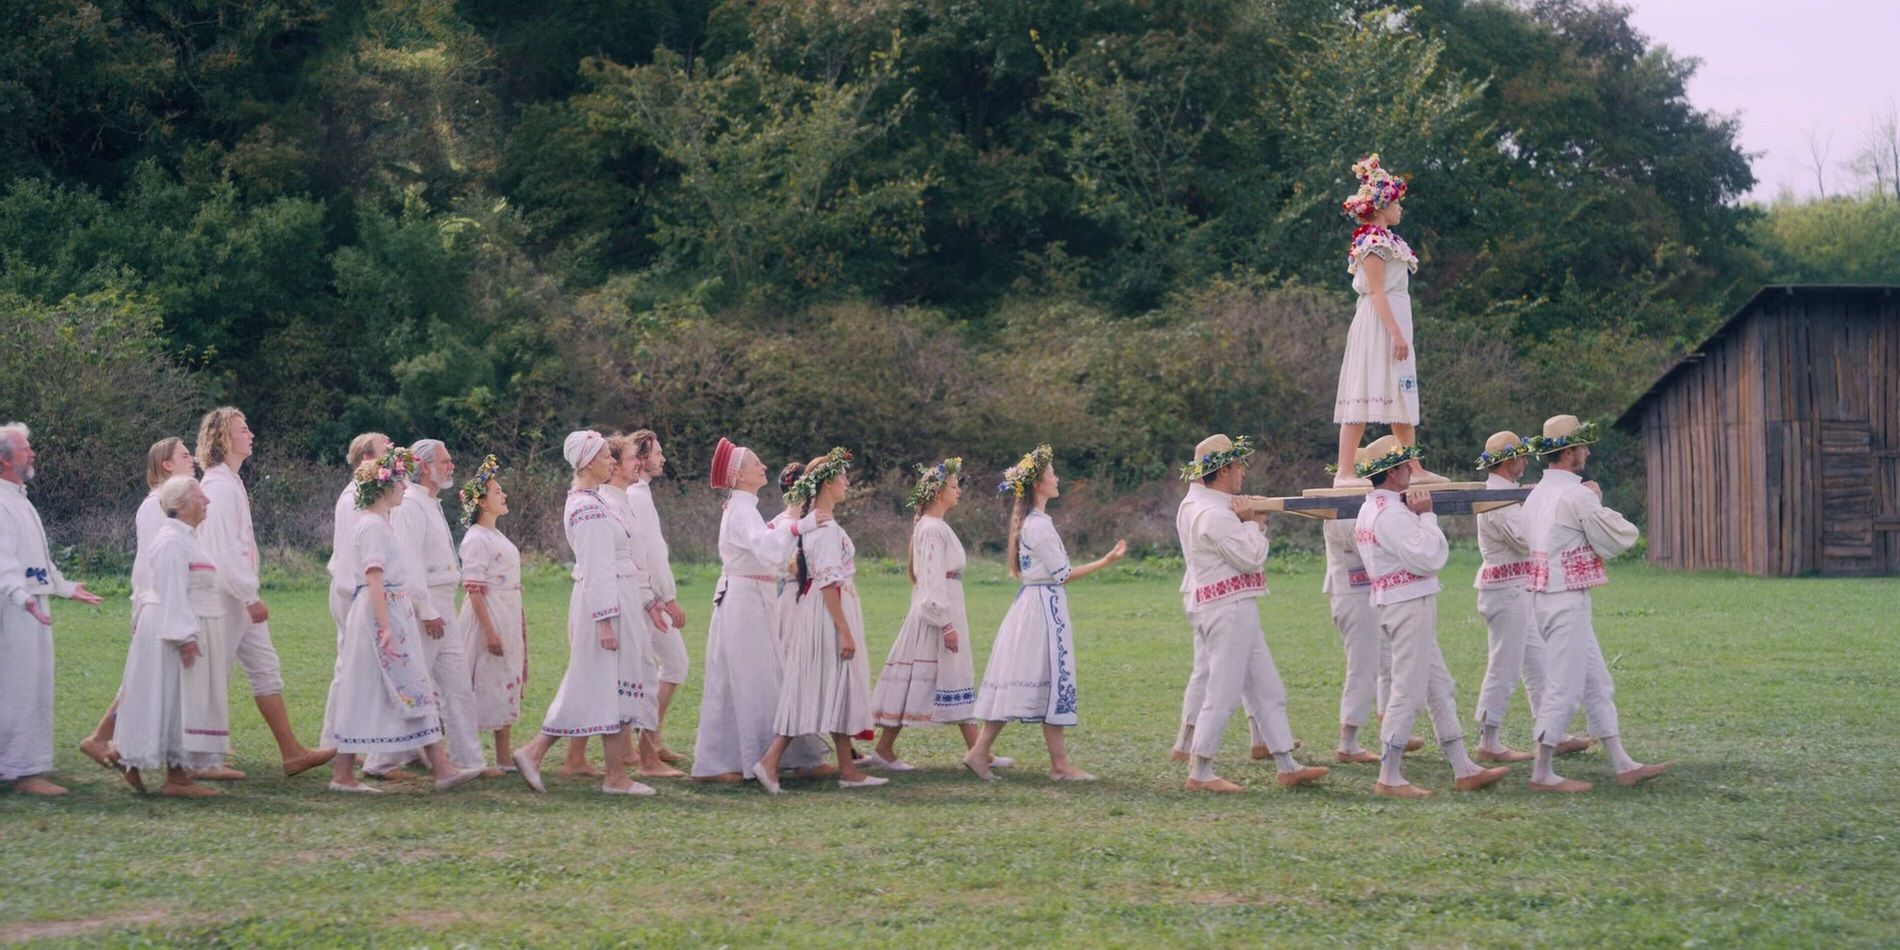 Dani rides as the May Queen in Midsommar